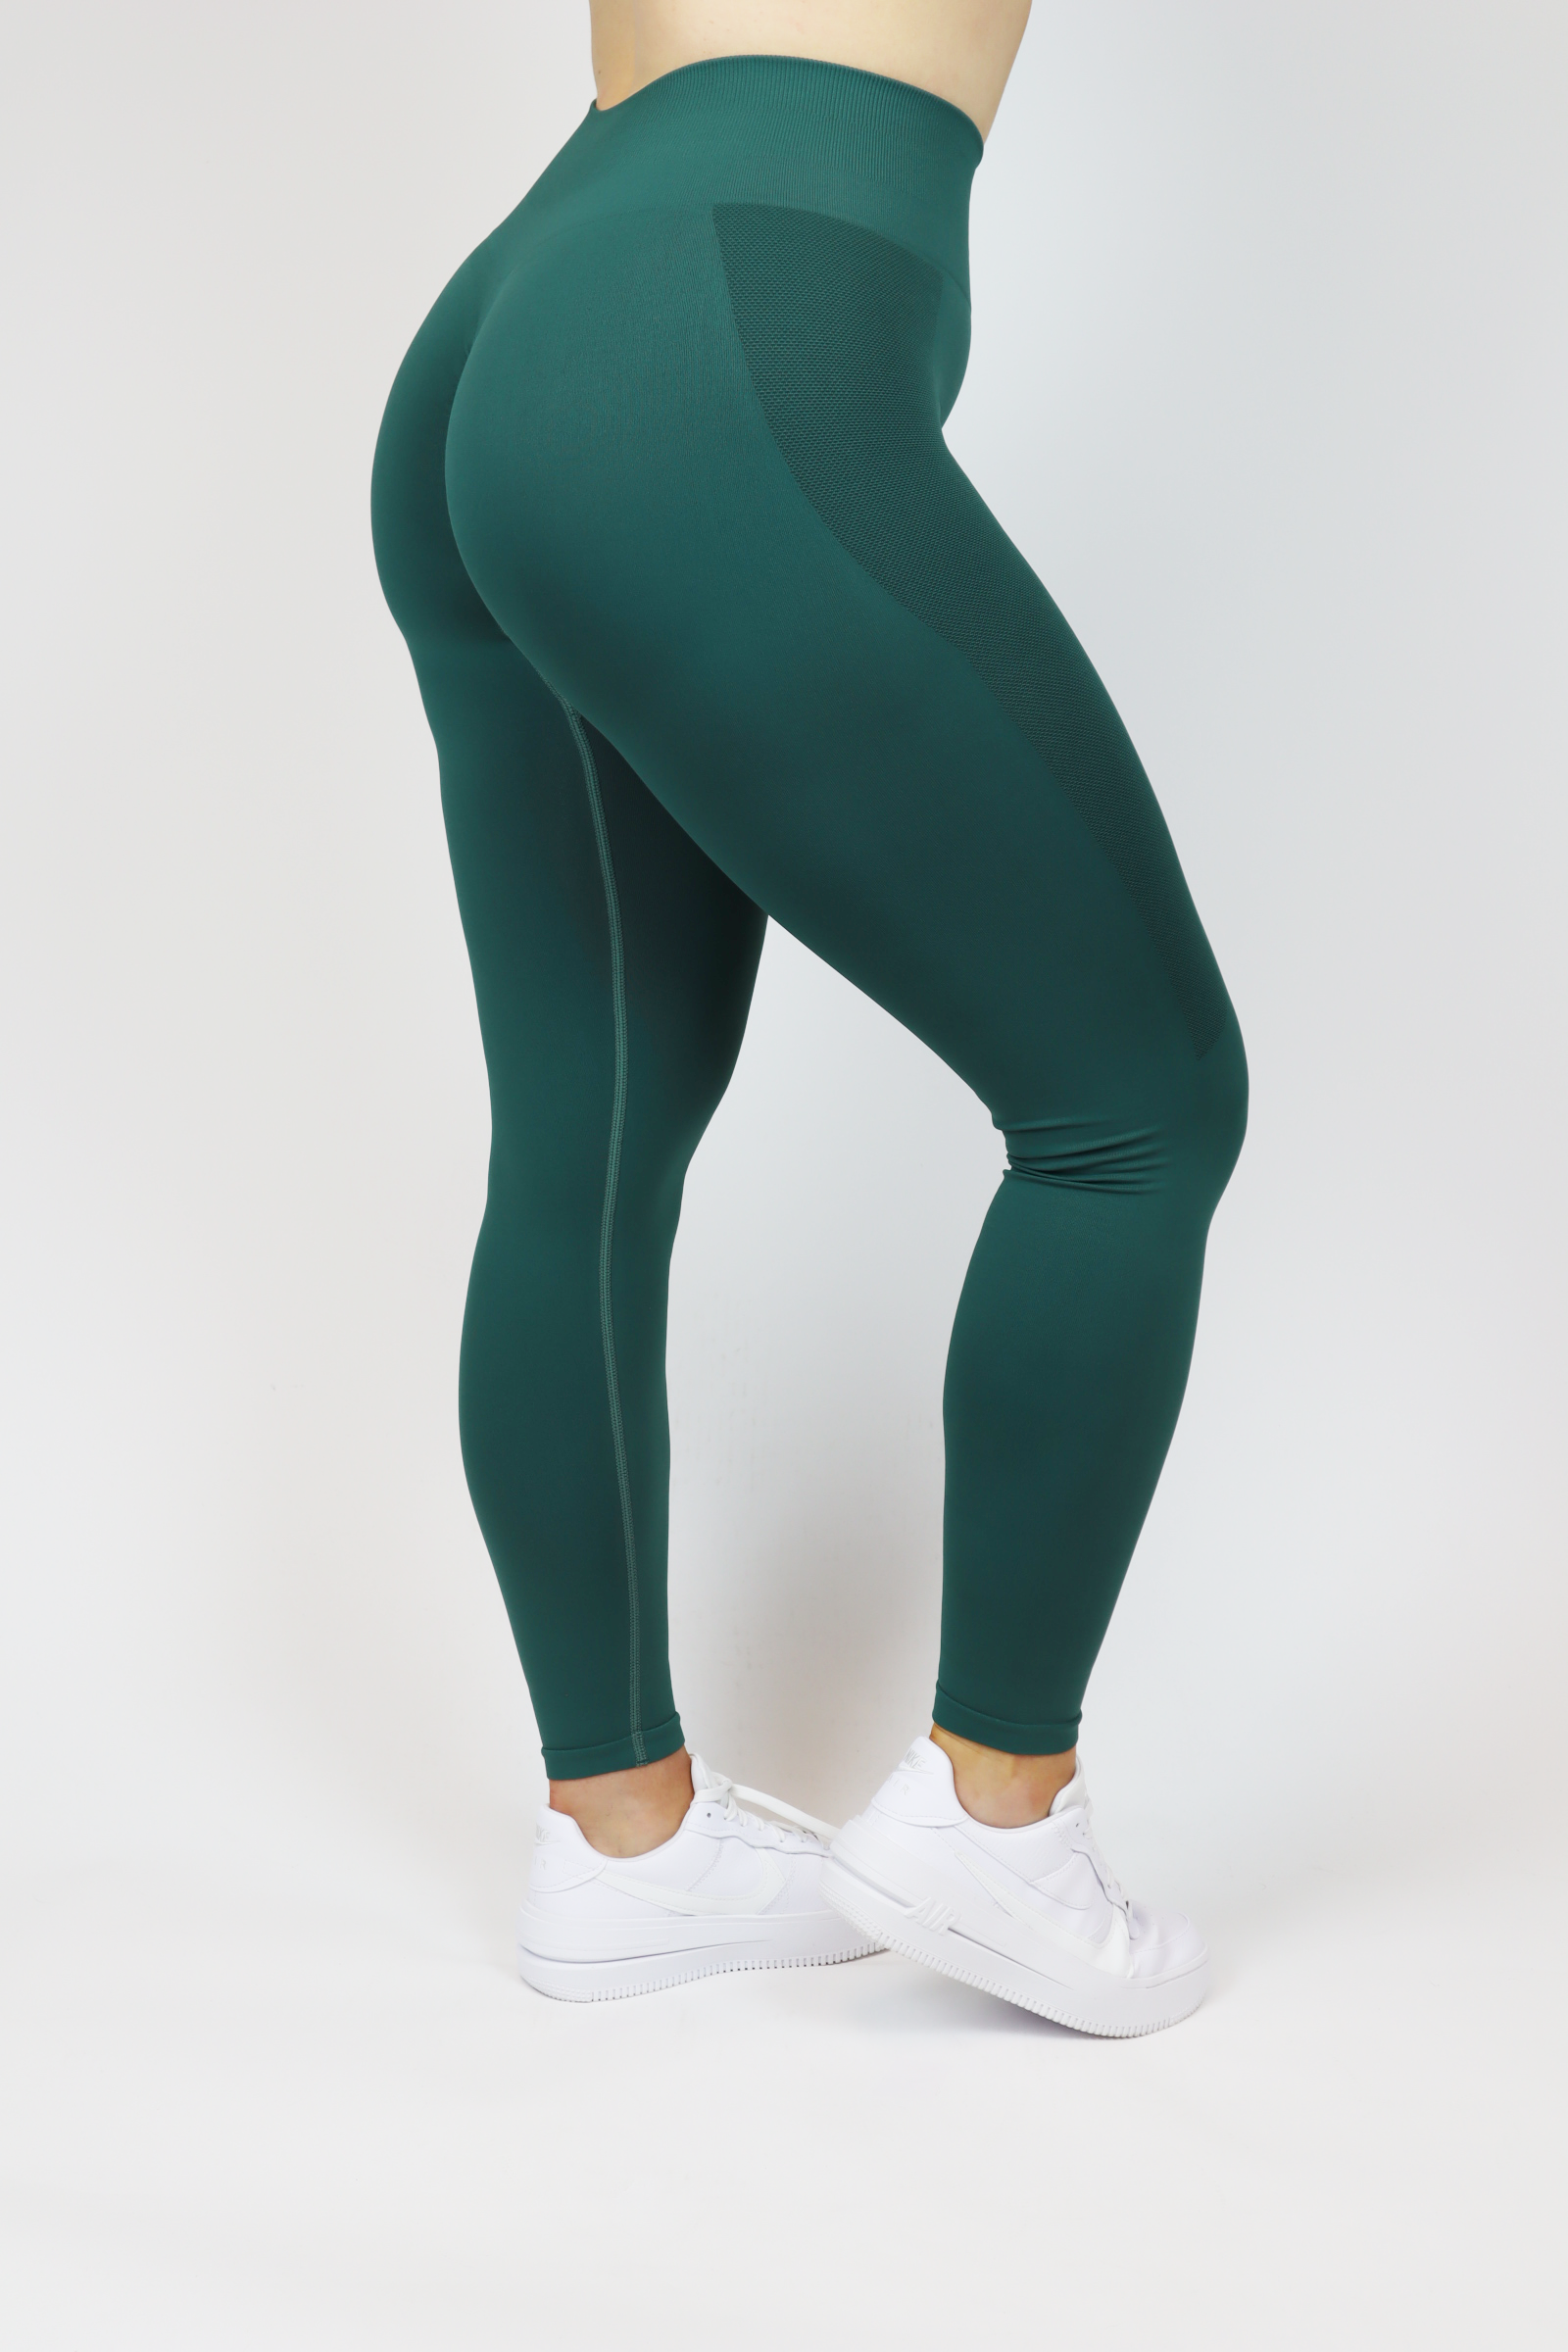 Best form fitting and comfortable women's gym leggings 